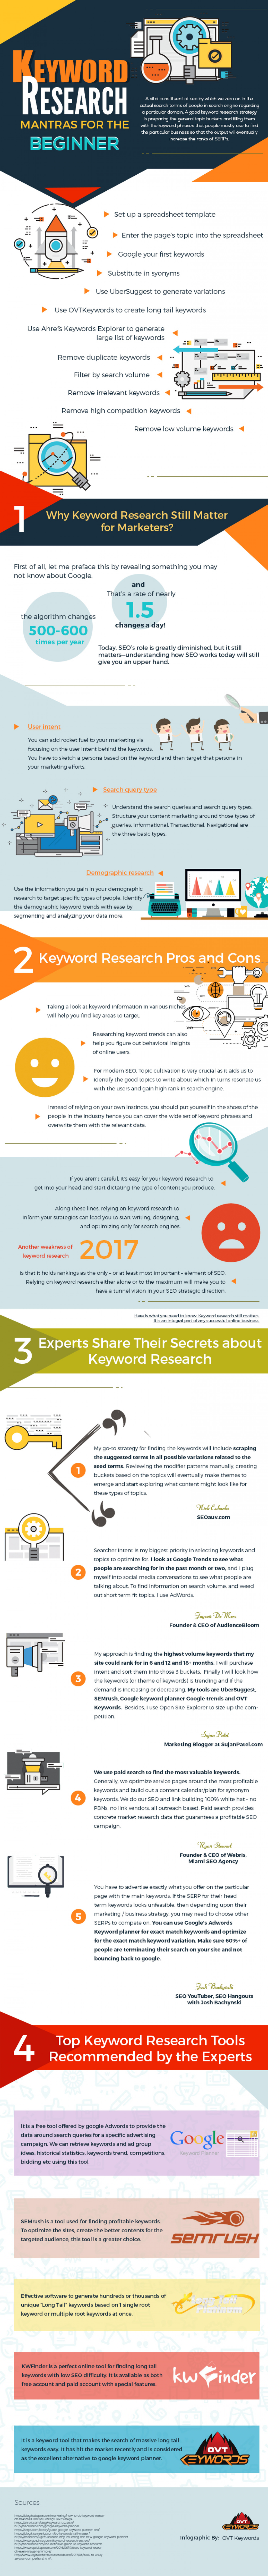 Keyword Research Mantras For The Beginner Infographic